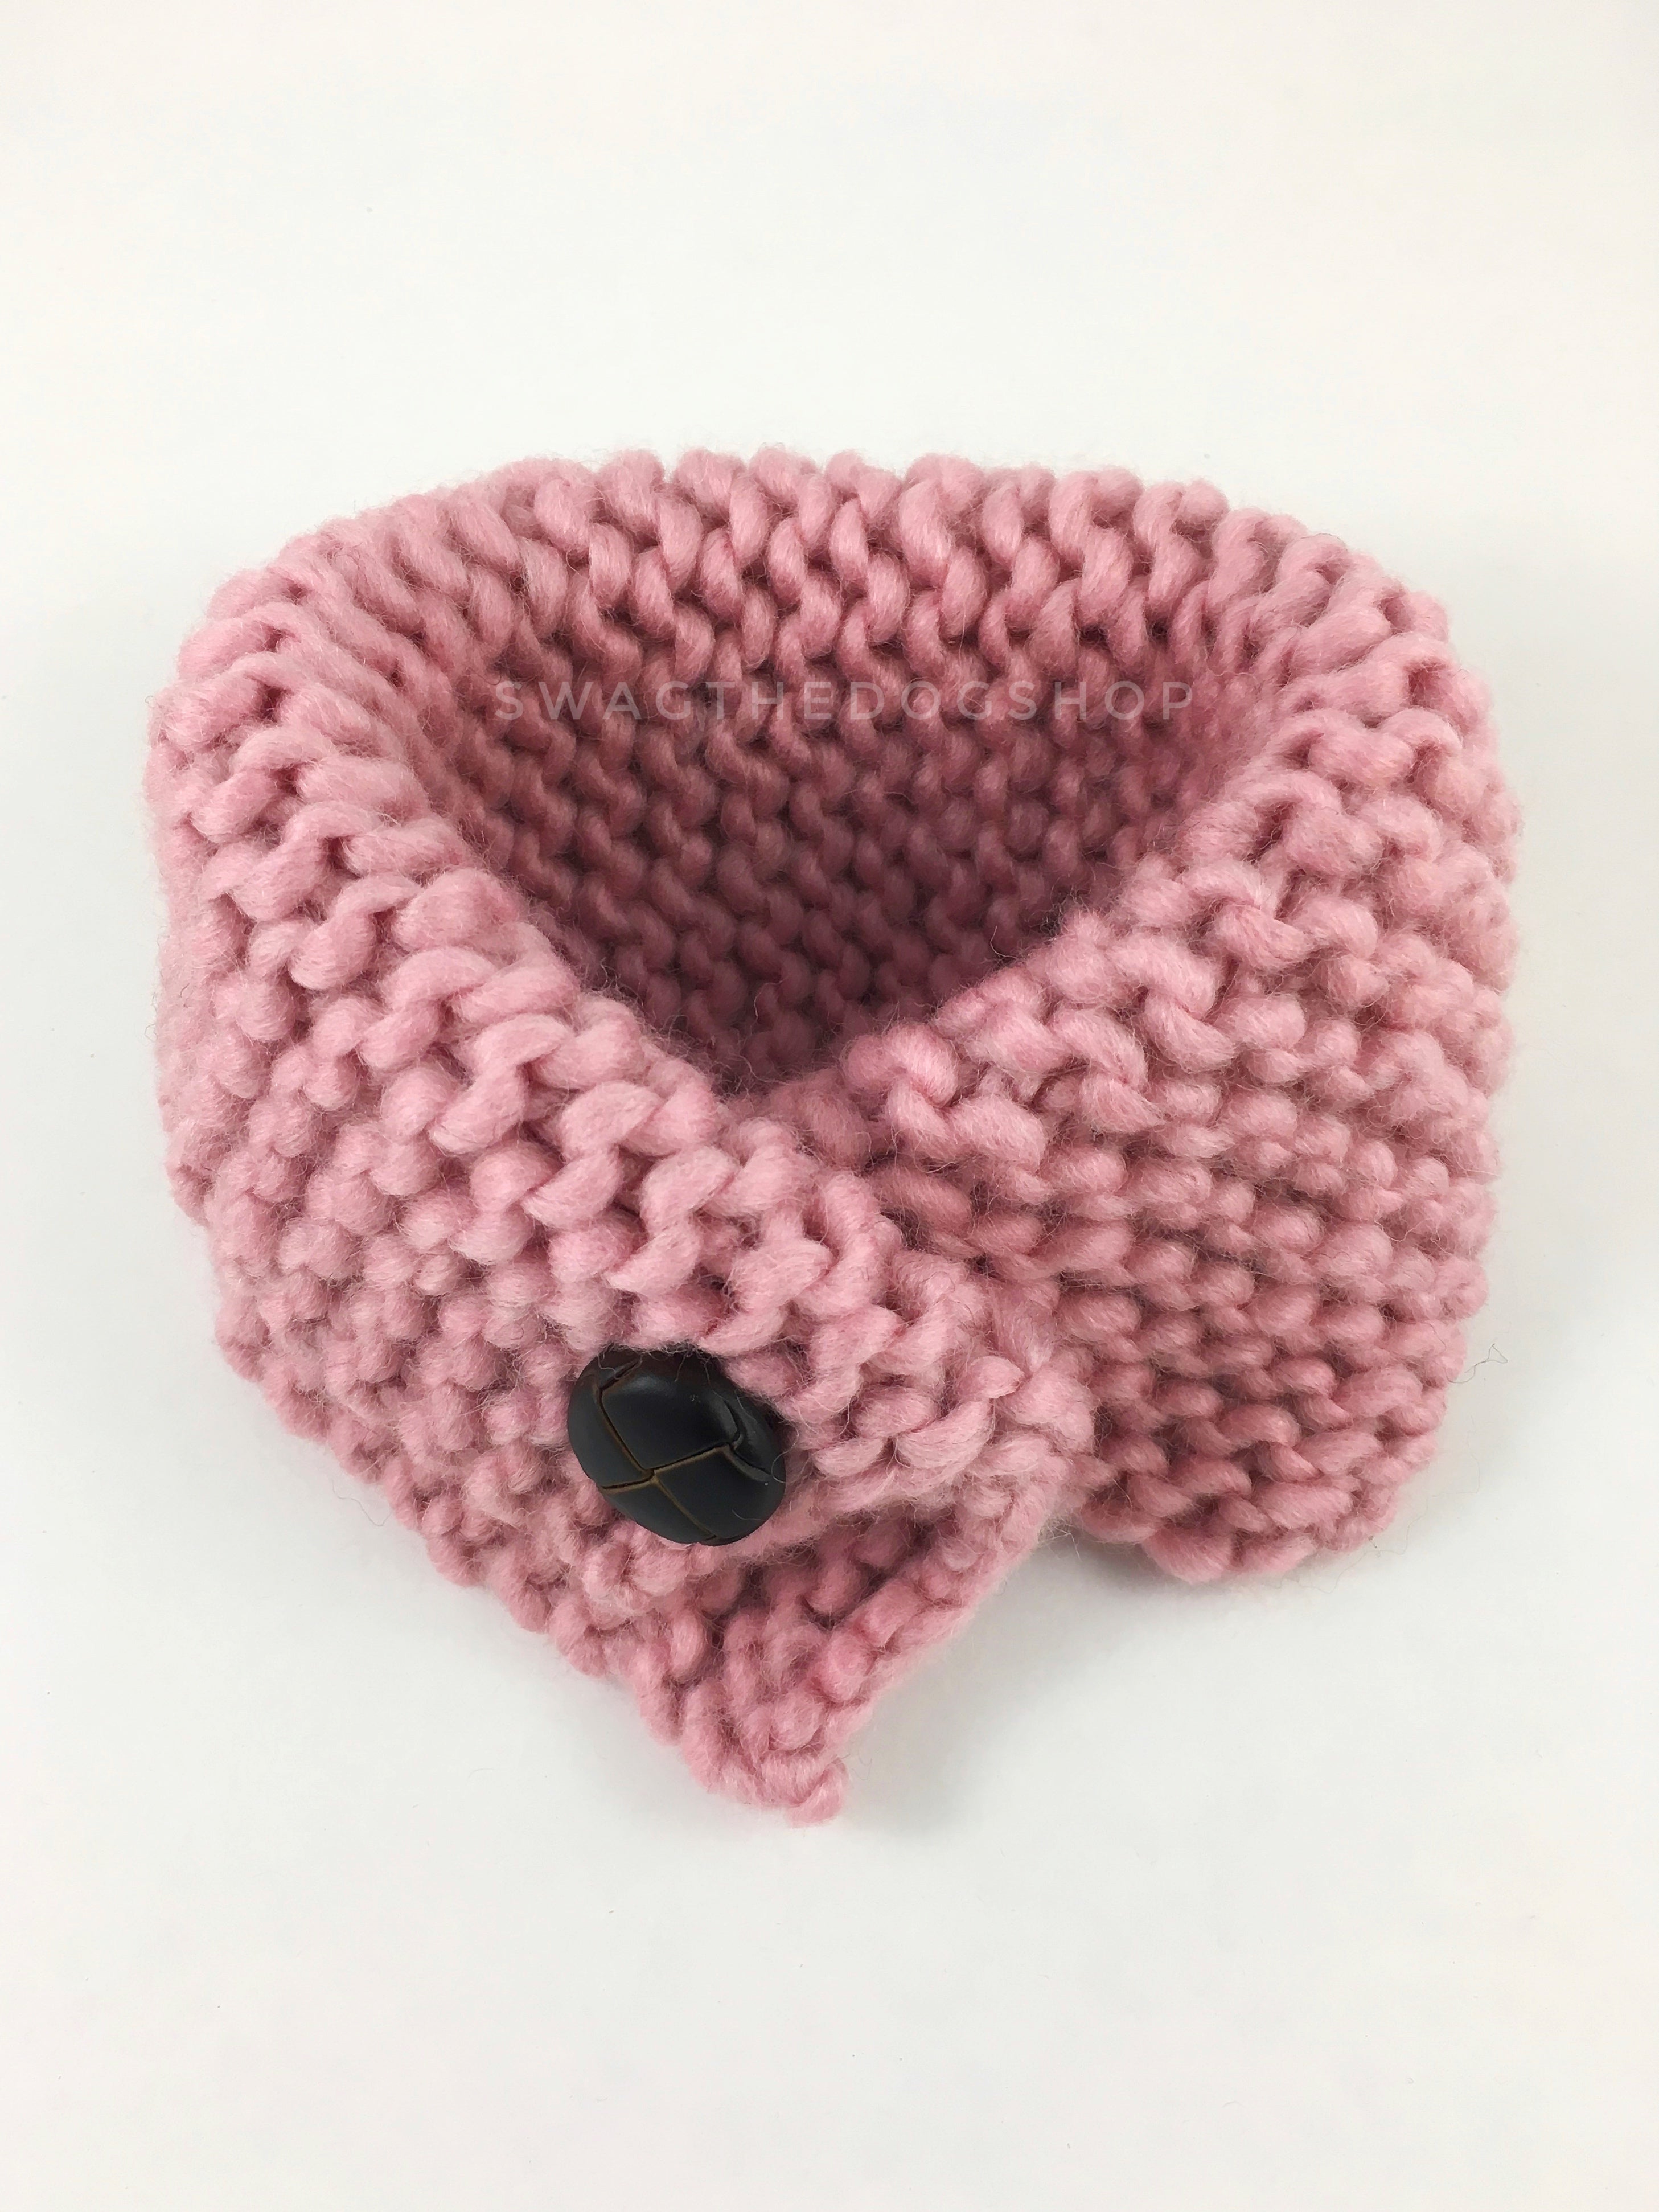 Rosewater Swagsnood - Product Above View. Dusty Rose Pink Color Dog Snood with Accent Button